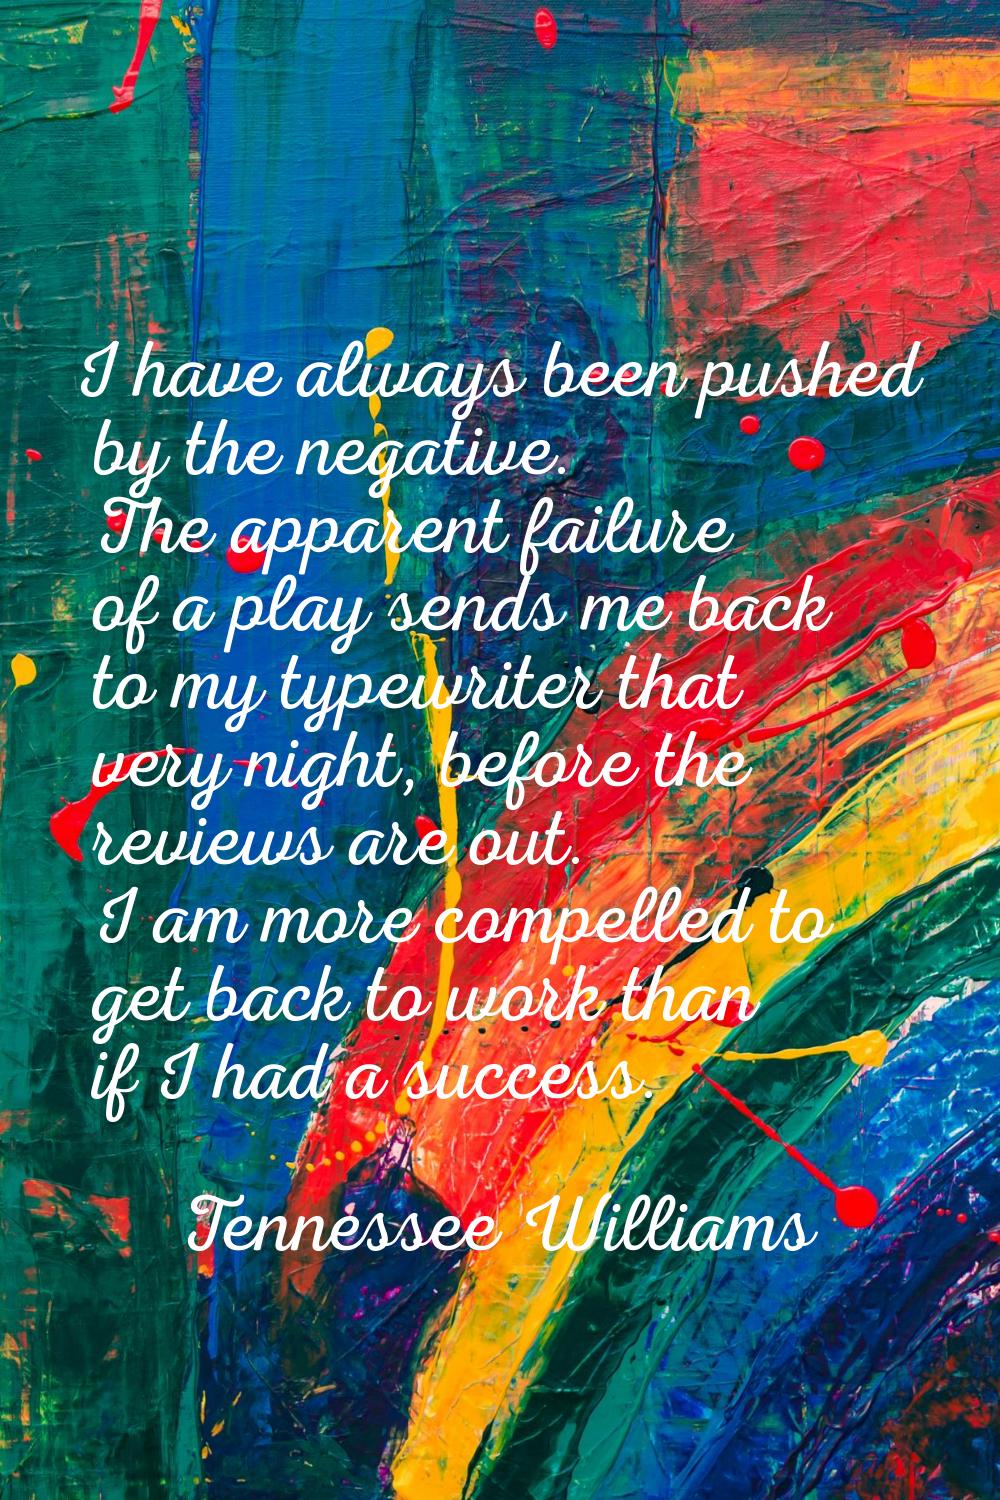 I have always been pushed by the negative. The apparent failure of a play sends me back to my typew